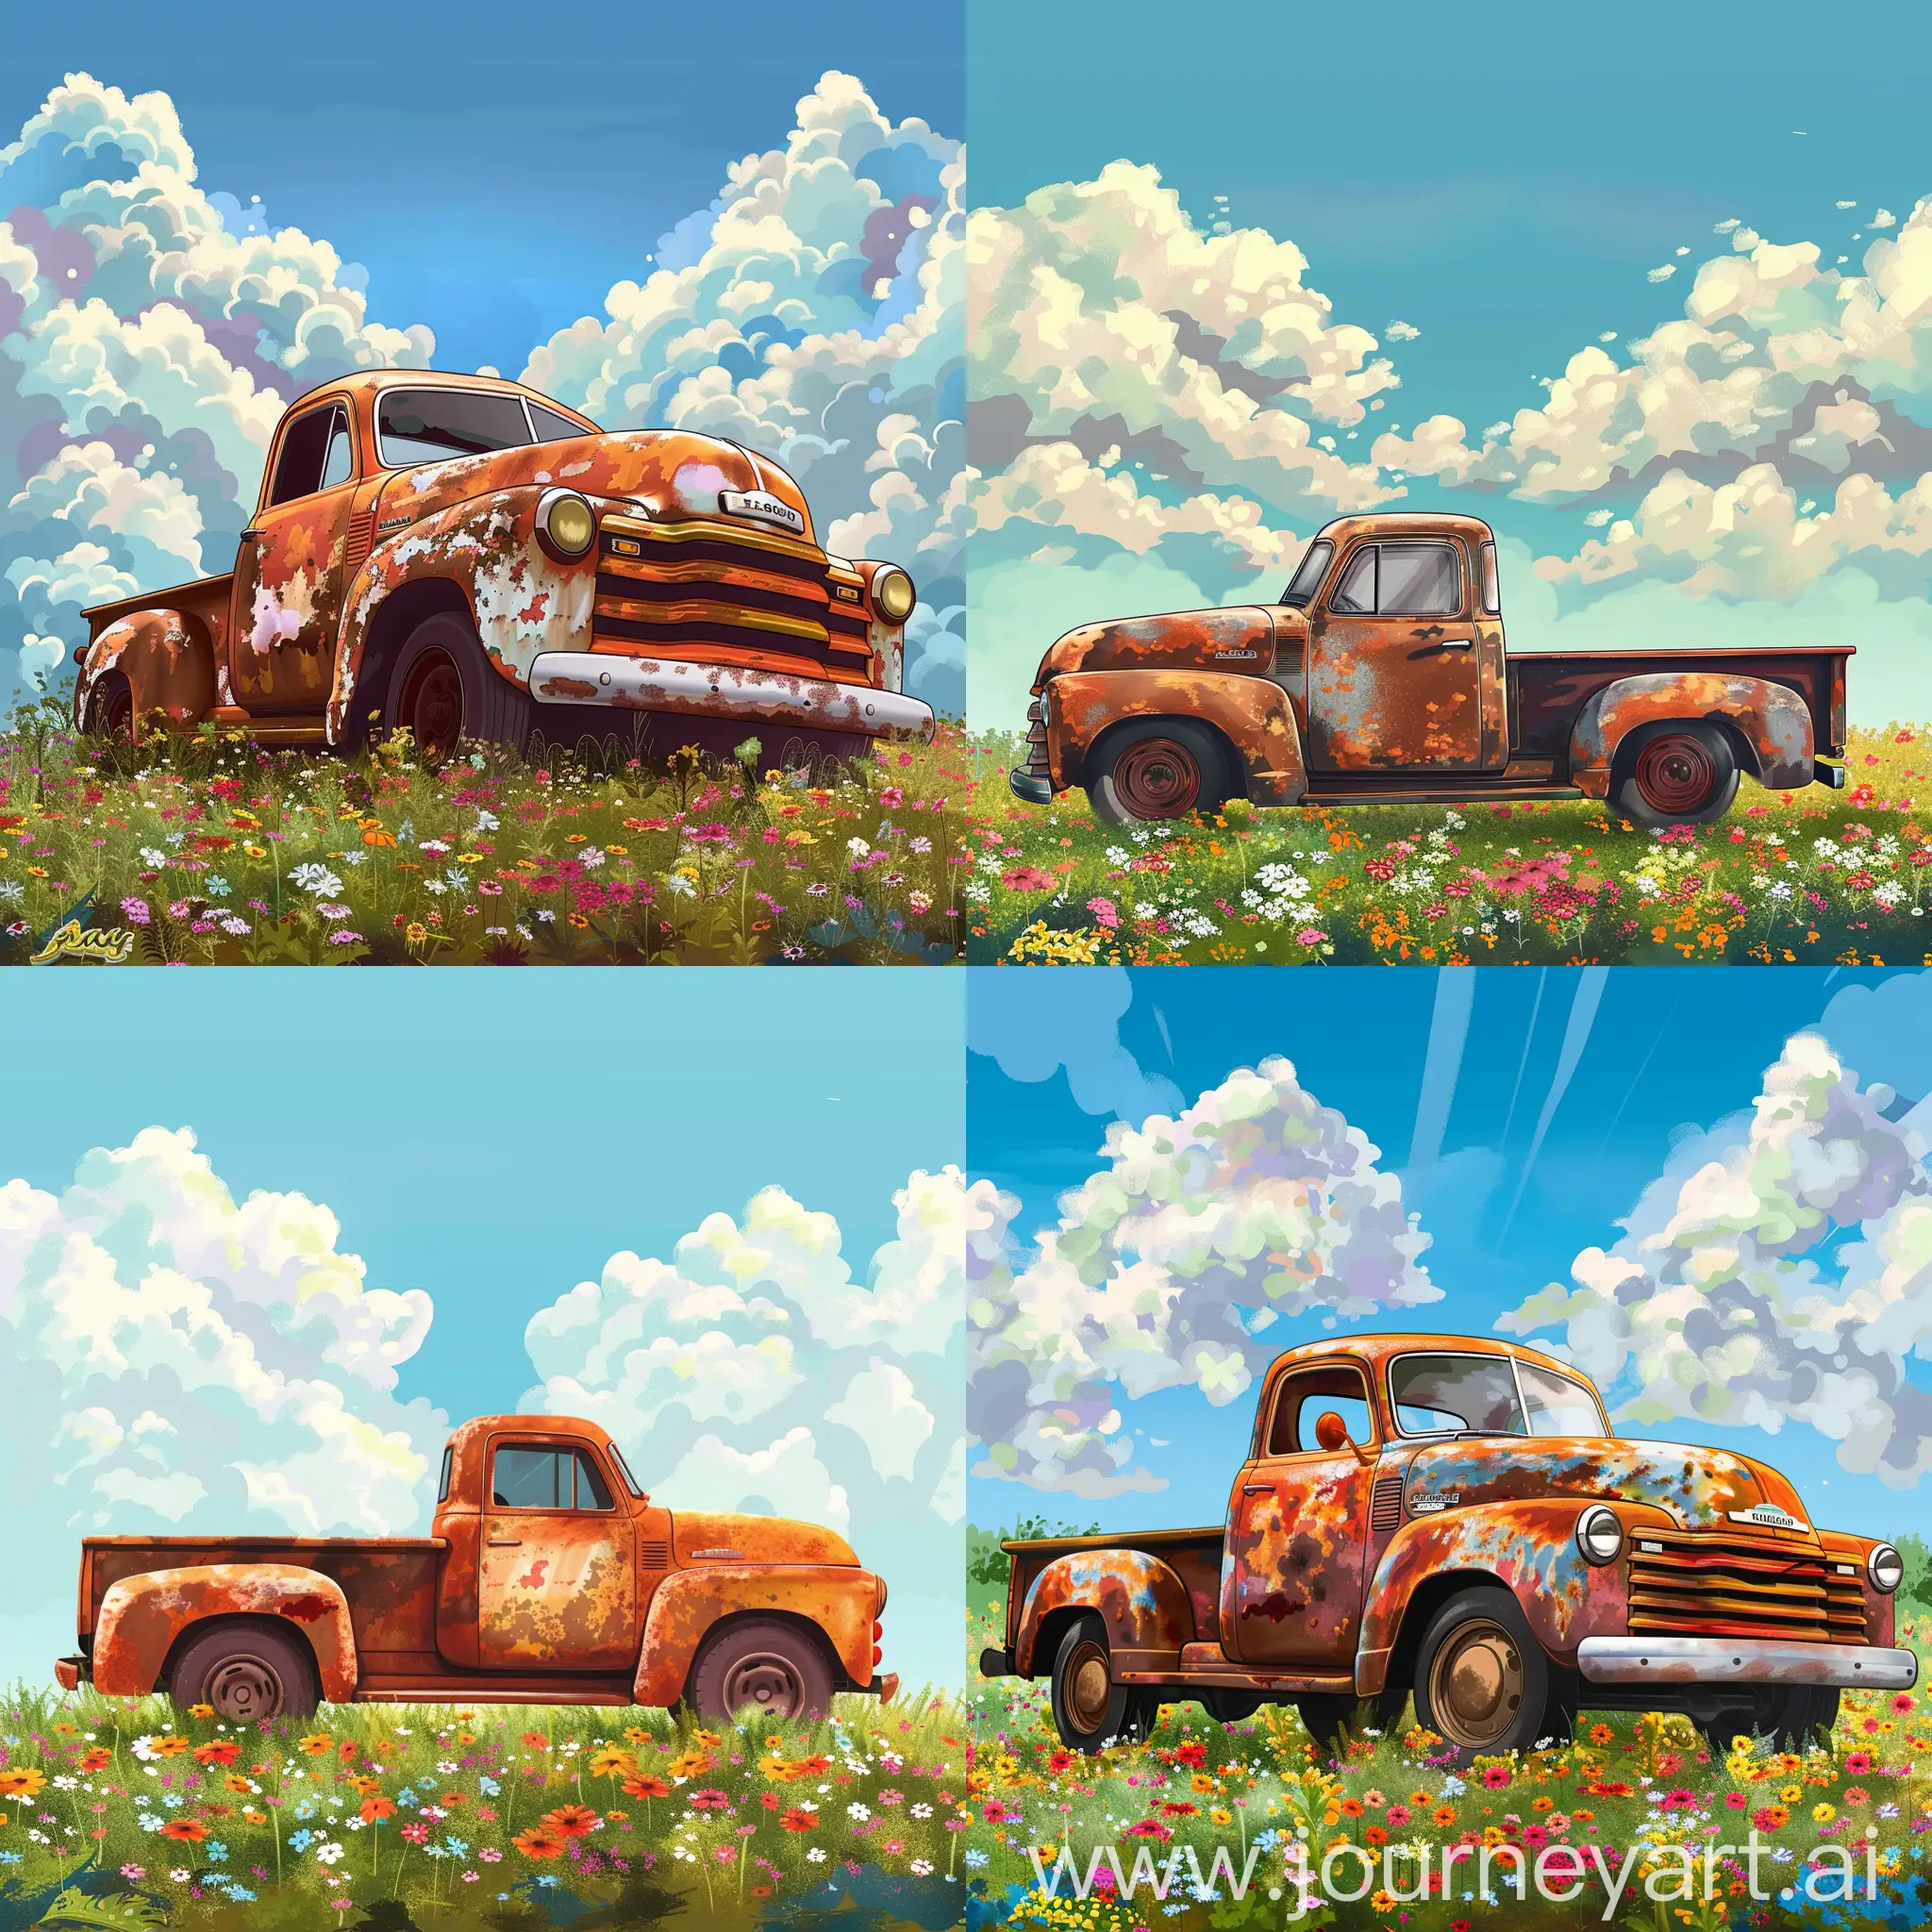 cartoon flat illustration of a rusted, classic pickup truck with a patina finish that tells the story of its age and character, placed in a field of flowers with a bright blue sky with puffy clouds, HD